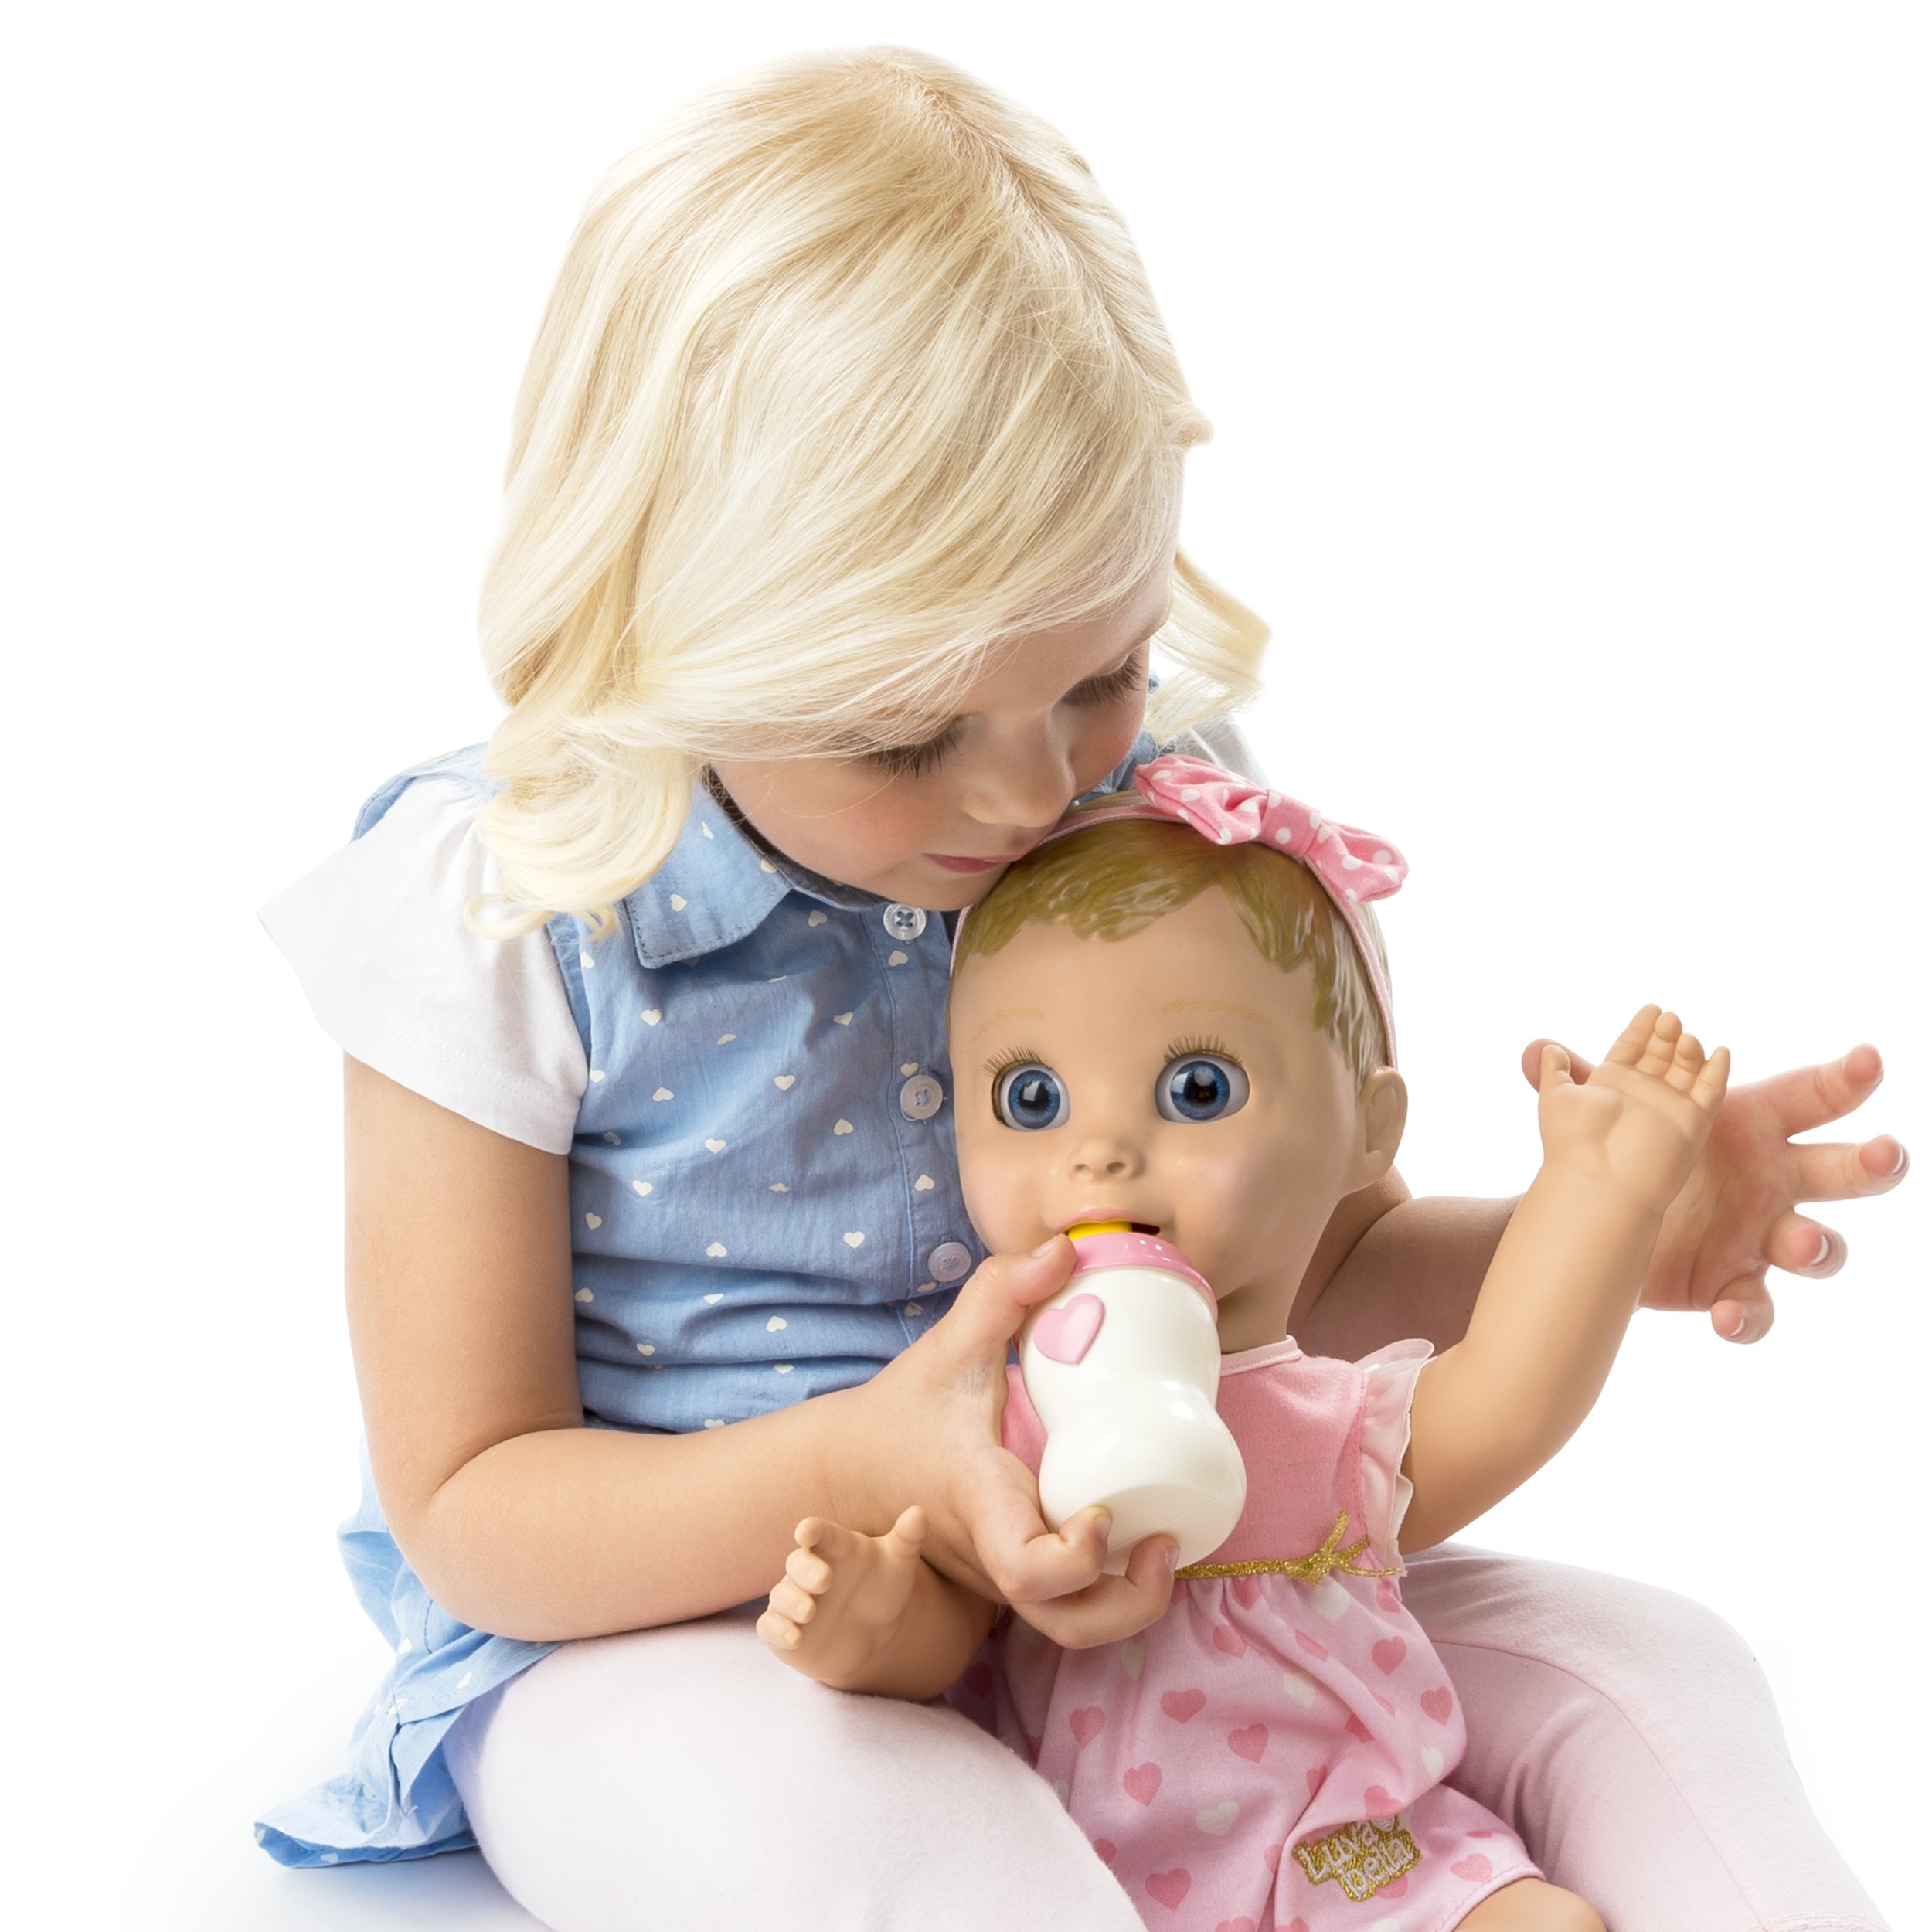 Luvabella - Blonde Hair - Responsive Baby Doll with Realistic Expressions and Movement - image 4 of 8